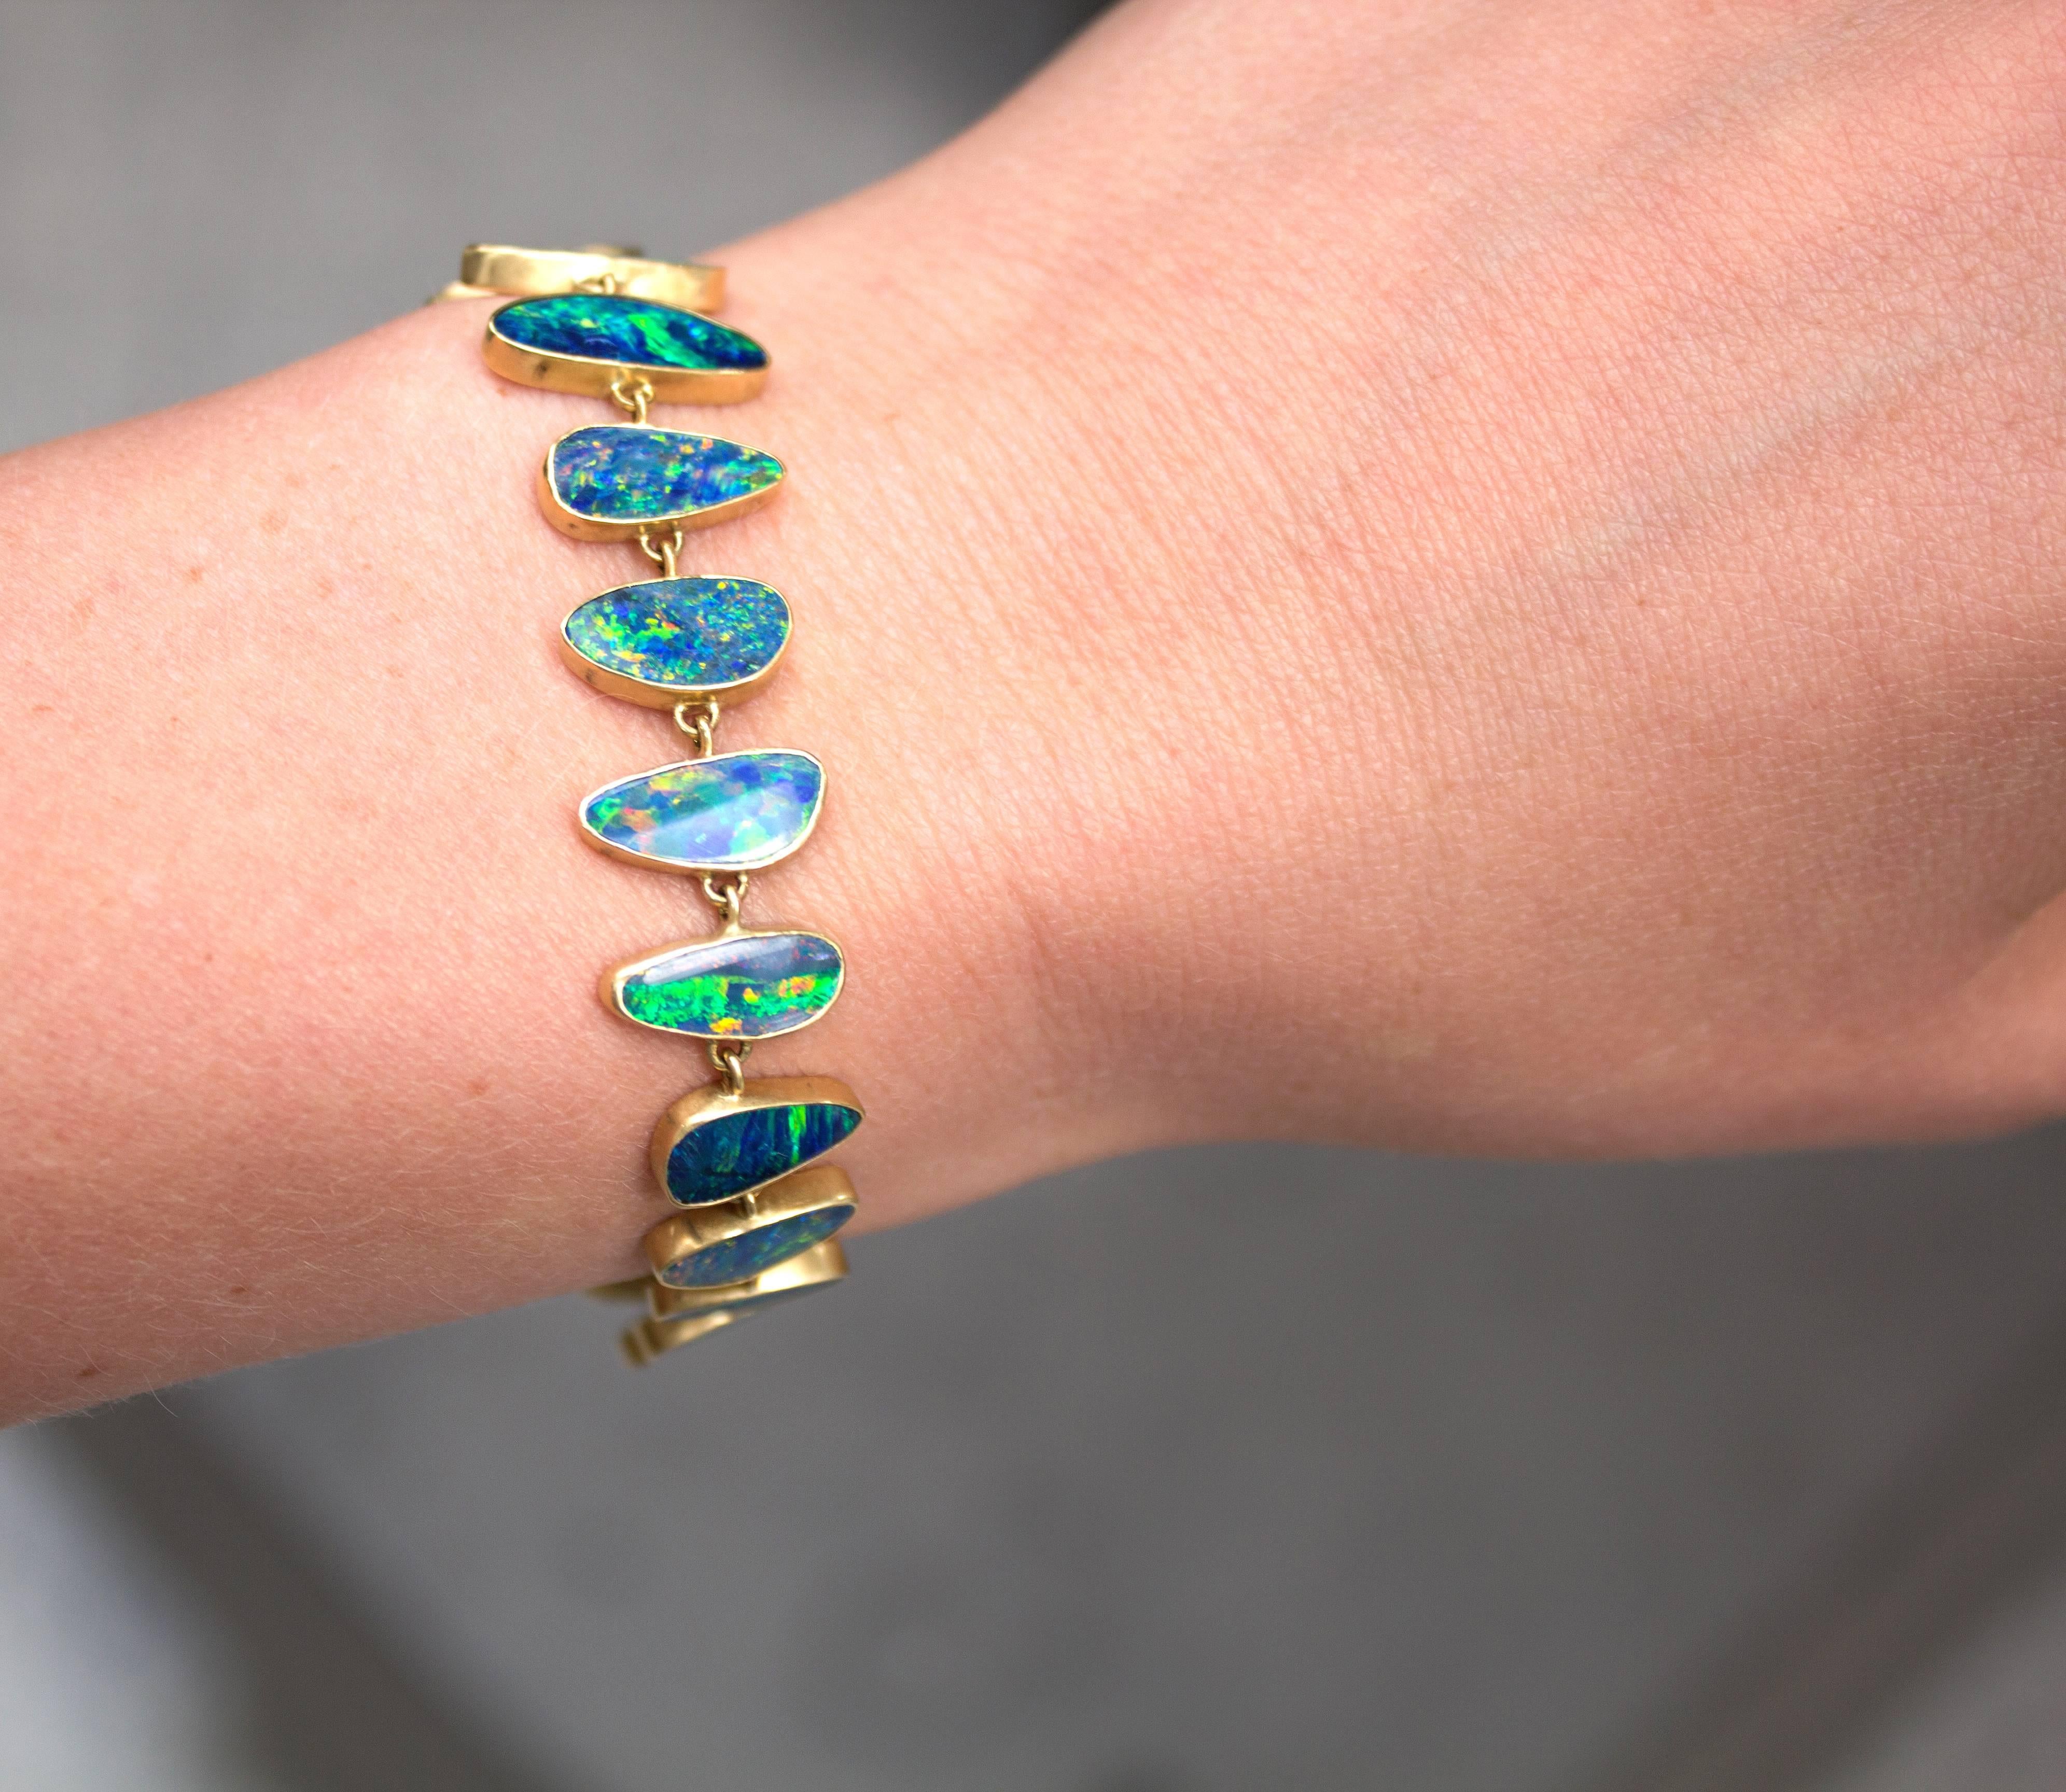 One of a Kind Bracelet handcrafted by acclaimed jewelry designer Kothari in matte-finished 18k yellow gold showcasing 21 beautifully-matched yet individually distinctive boulder opal gemstones featuring vibrant and electrifying play-of-color, all